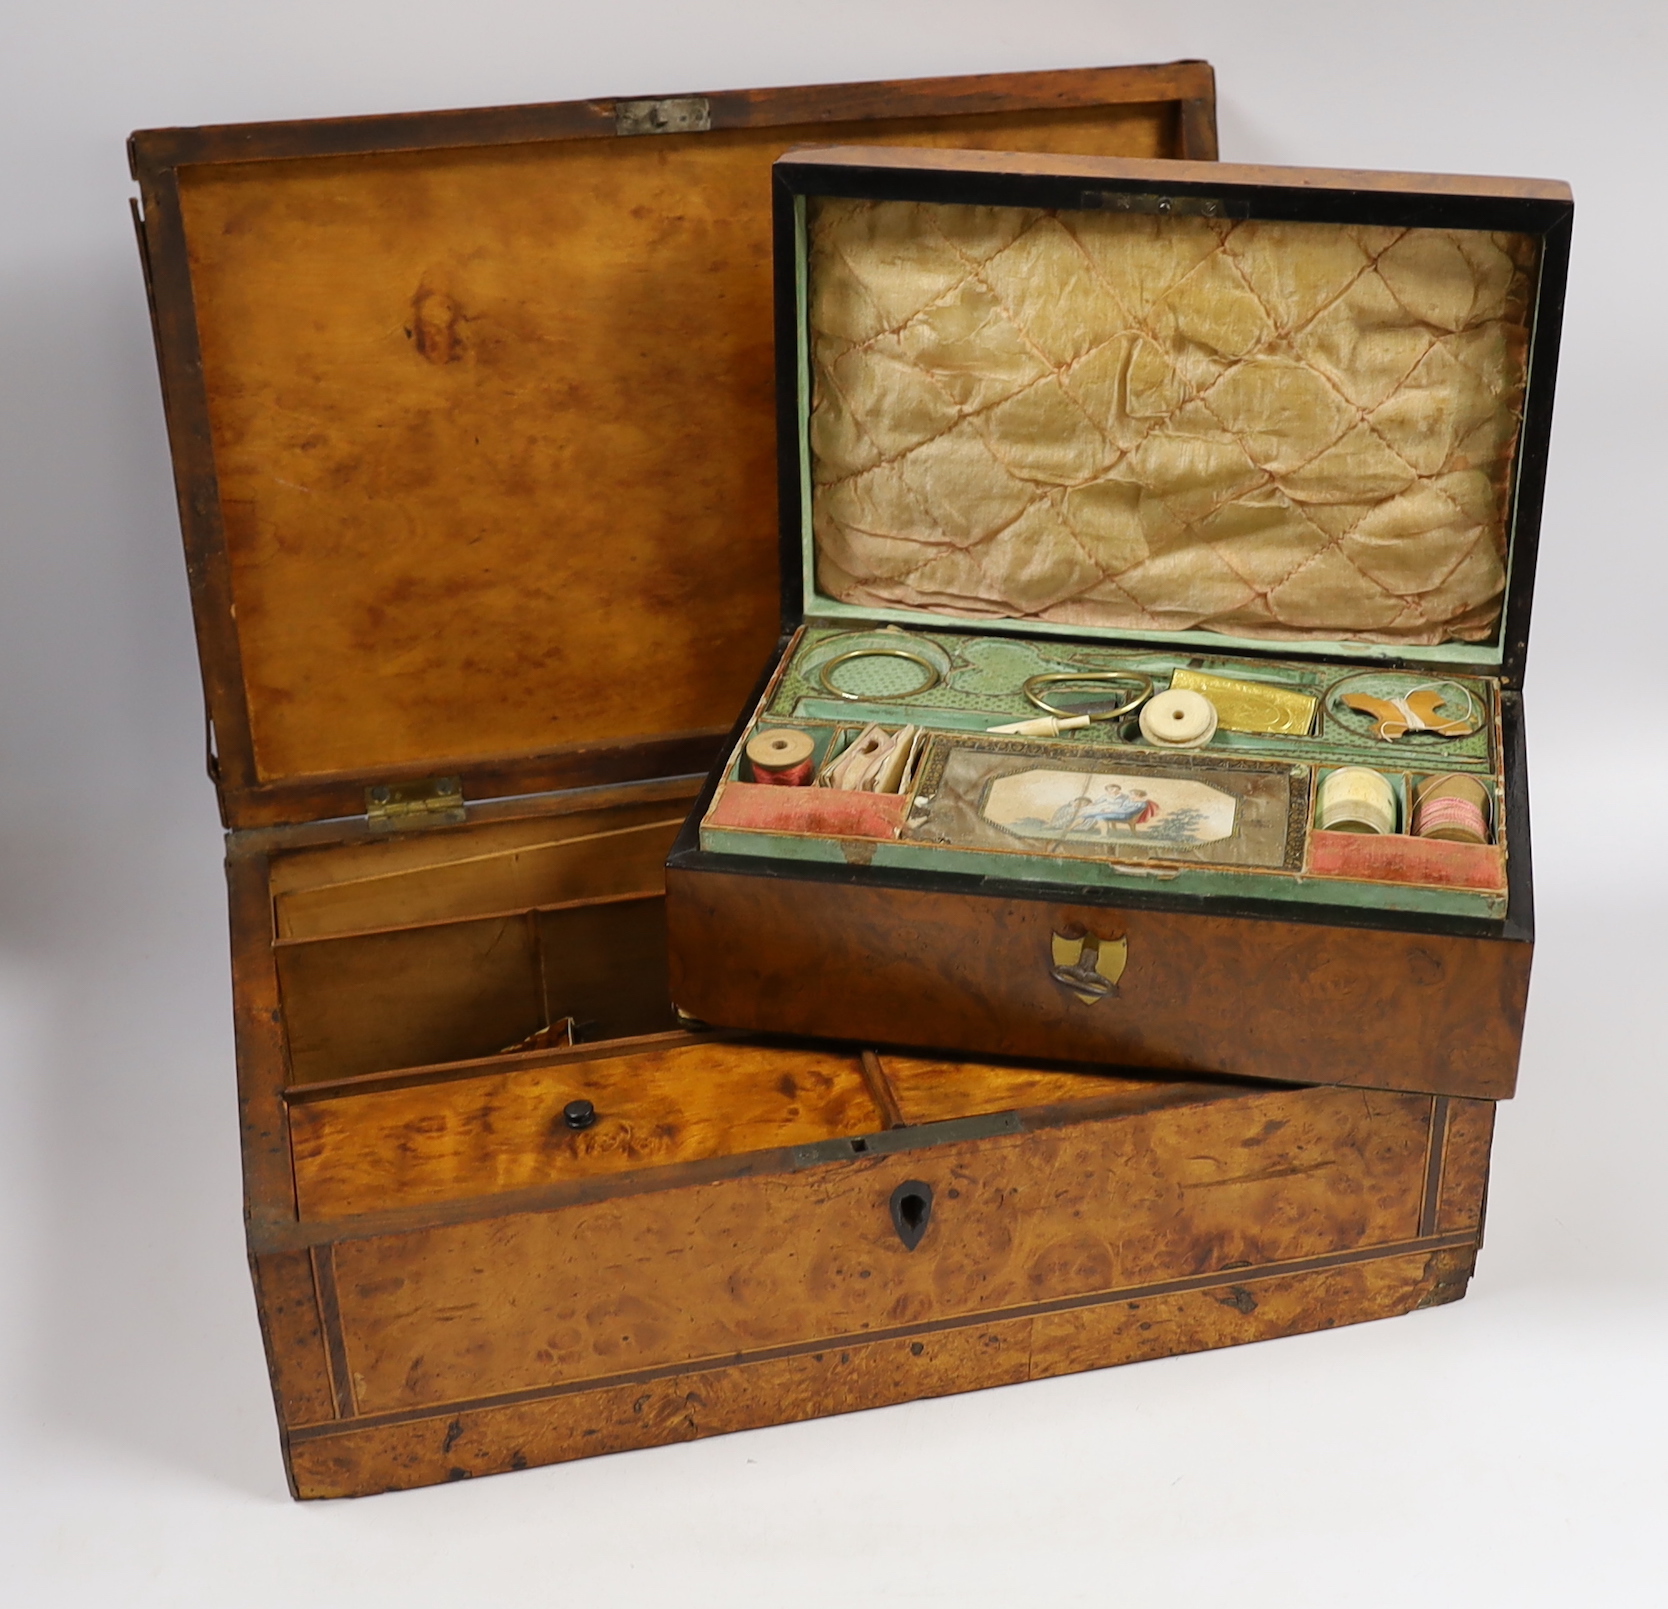 An early 19th century French bird's-eye maple and a walnut sewing box containing some sewing accessories, 24 x 16 x 8cm